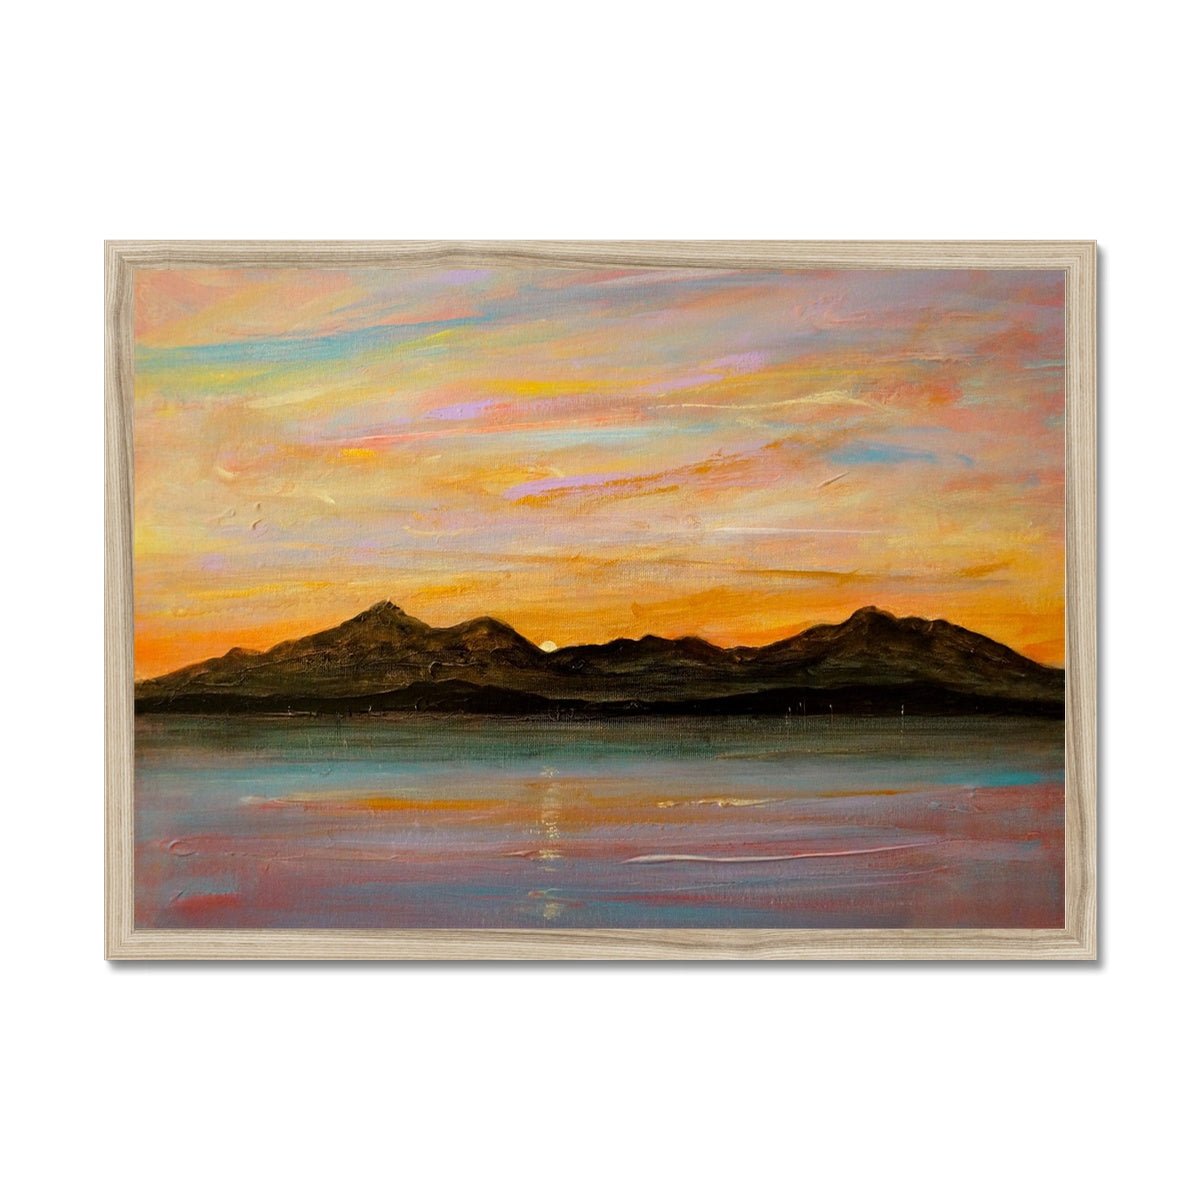 The Sleeping Warrior Arran Painting | Framed Prints From Scotland-Framed Prints-Arran Art Gallery-A2 Landscape-Natural Frame-Paintings, Prints, Homeware, Art Gifts From Scotland By Scottish Artist Kevin Hunter